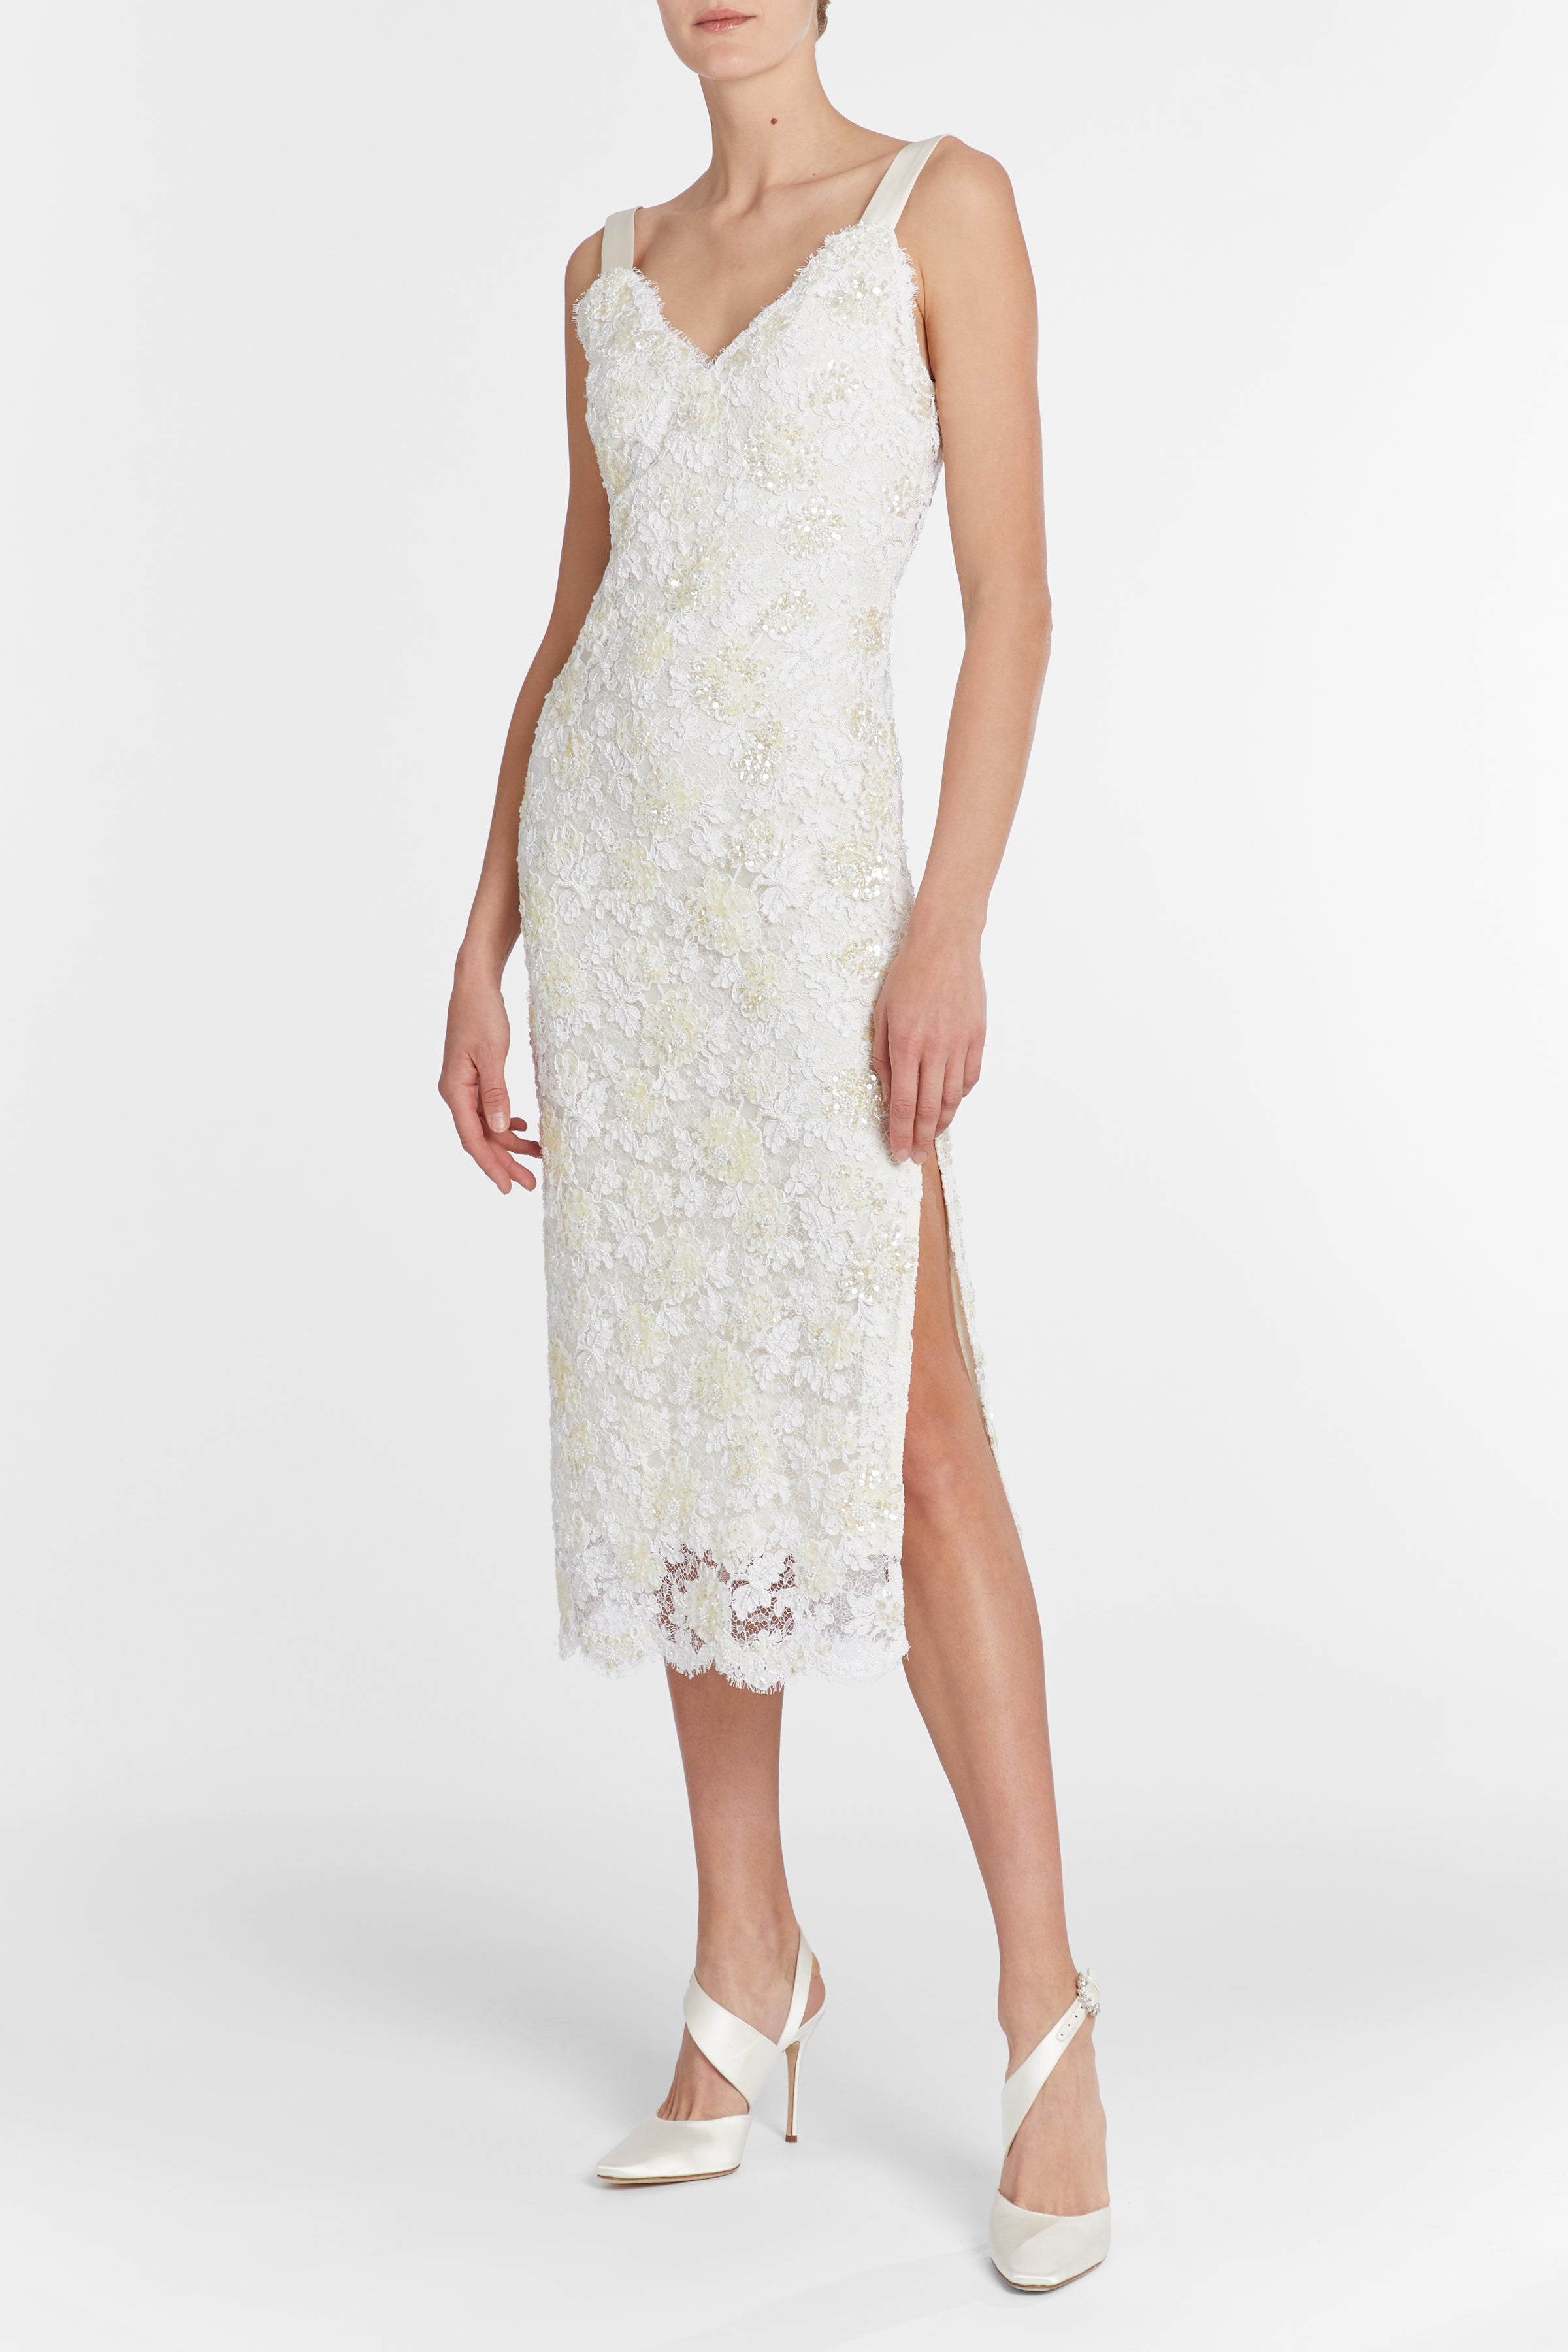 Bianca Beaded Lace Shift Dress With Side Slit